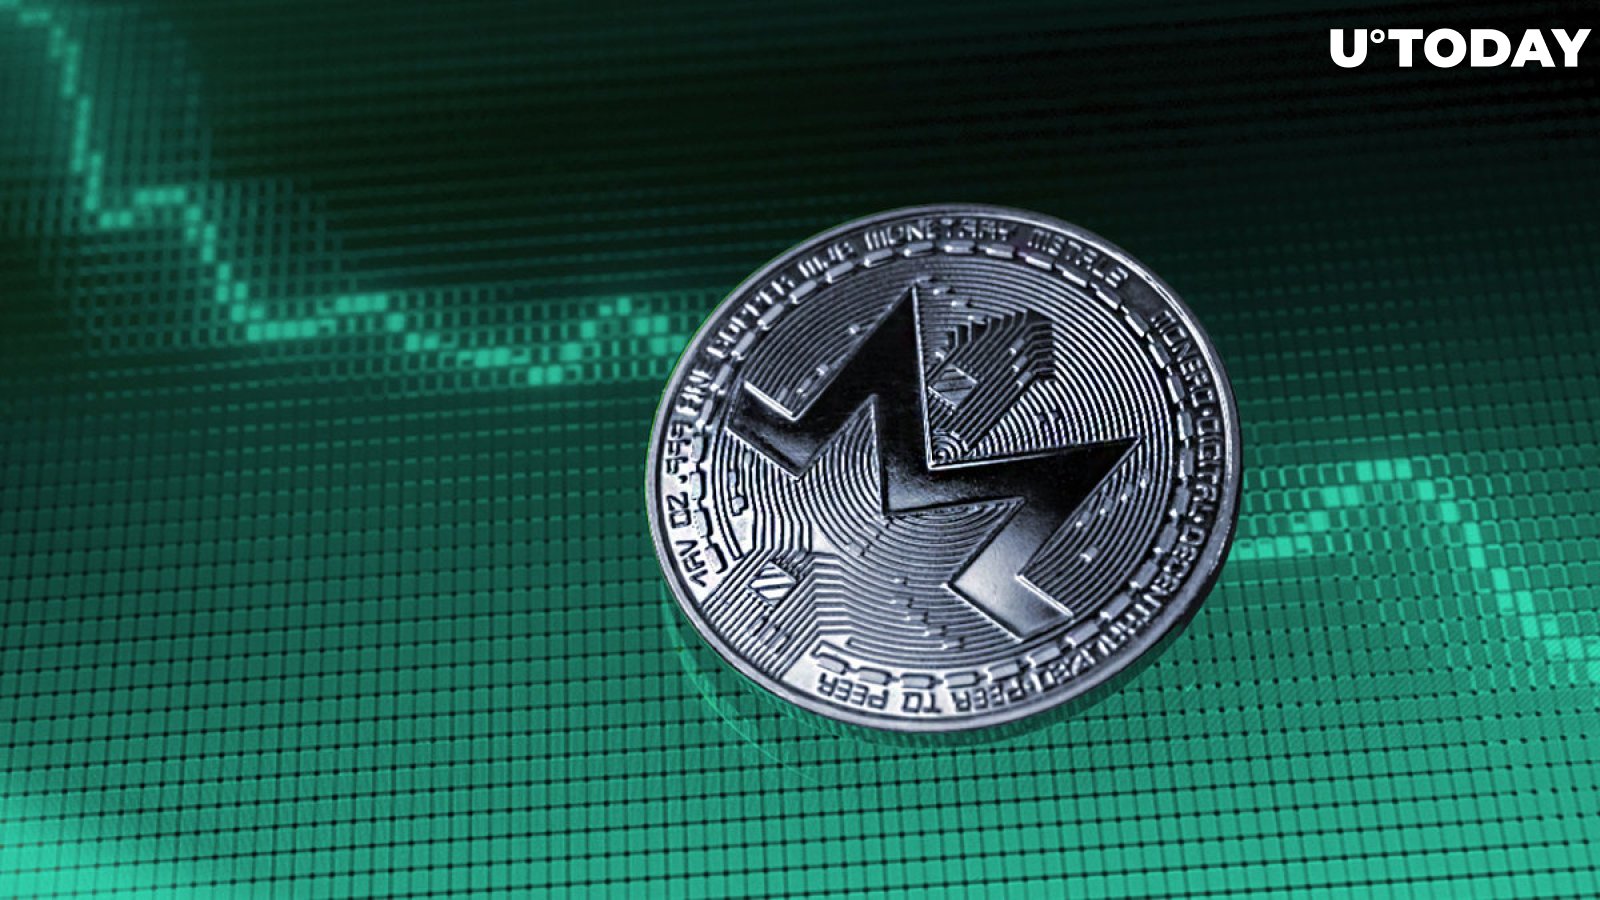 Monero (XMR) Leads Gains Among Top Privacy Coins in 2022